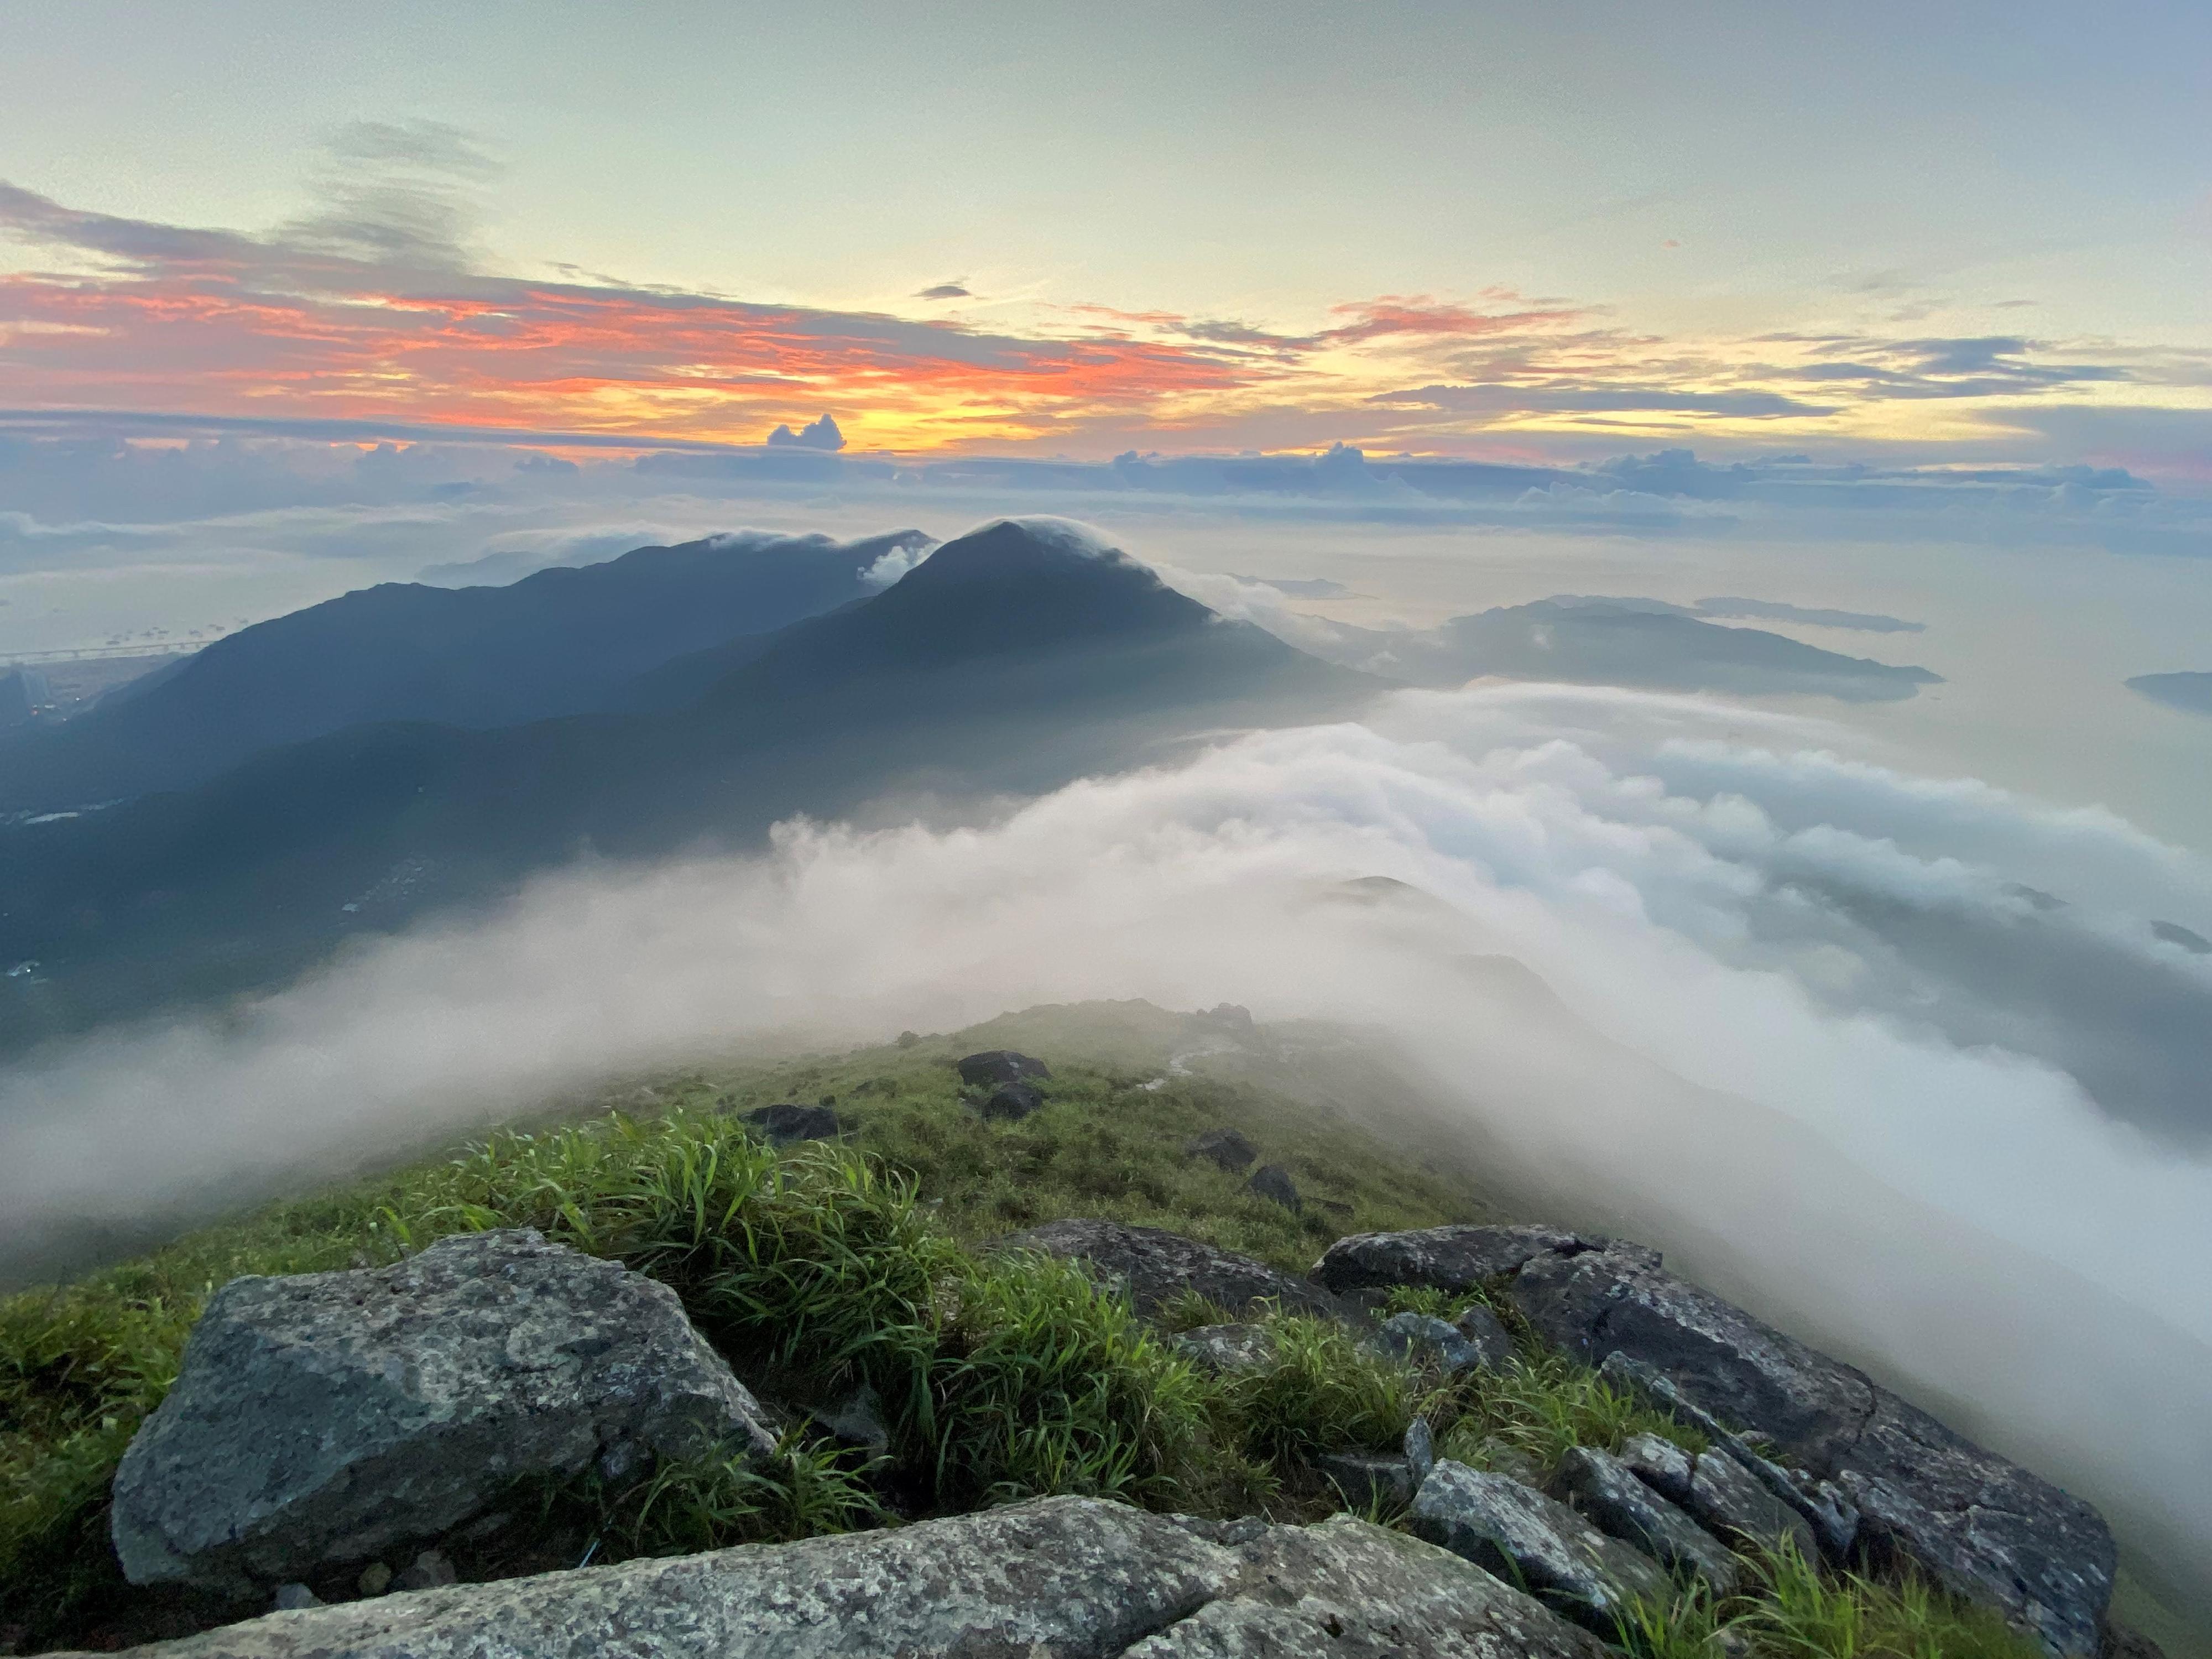 The Agriculture, Fisheries and Conservation Department announced the results of the Hong Kong Country Parks Photo cum Video Competition today (September 1). Photo shows "Lantau and Sunset Peak", the second runner-up of the mobile landscape photography category, taken by Leung Wai-kei.